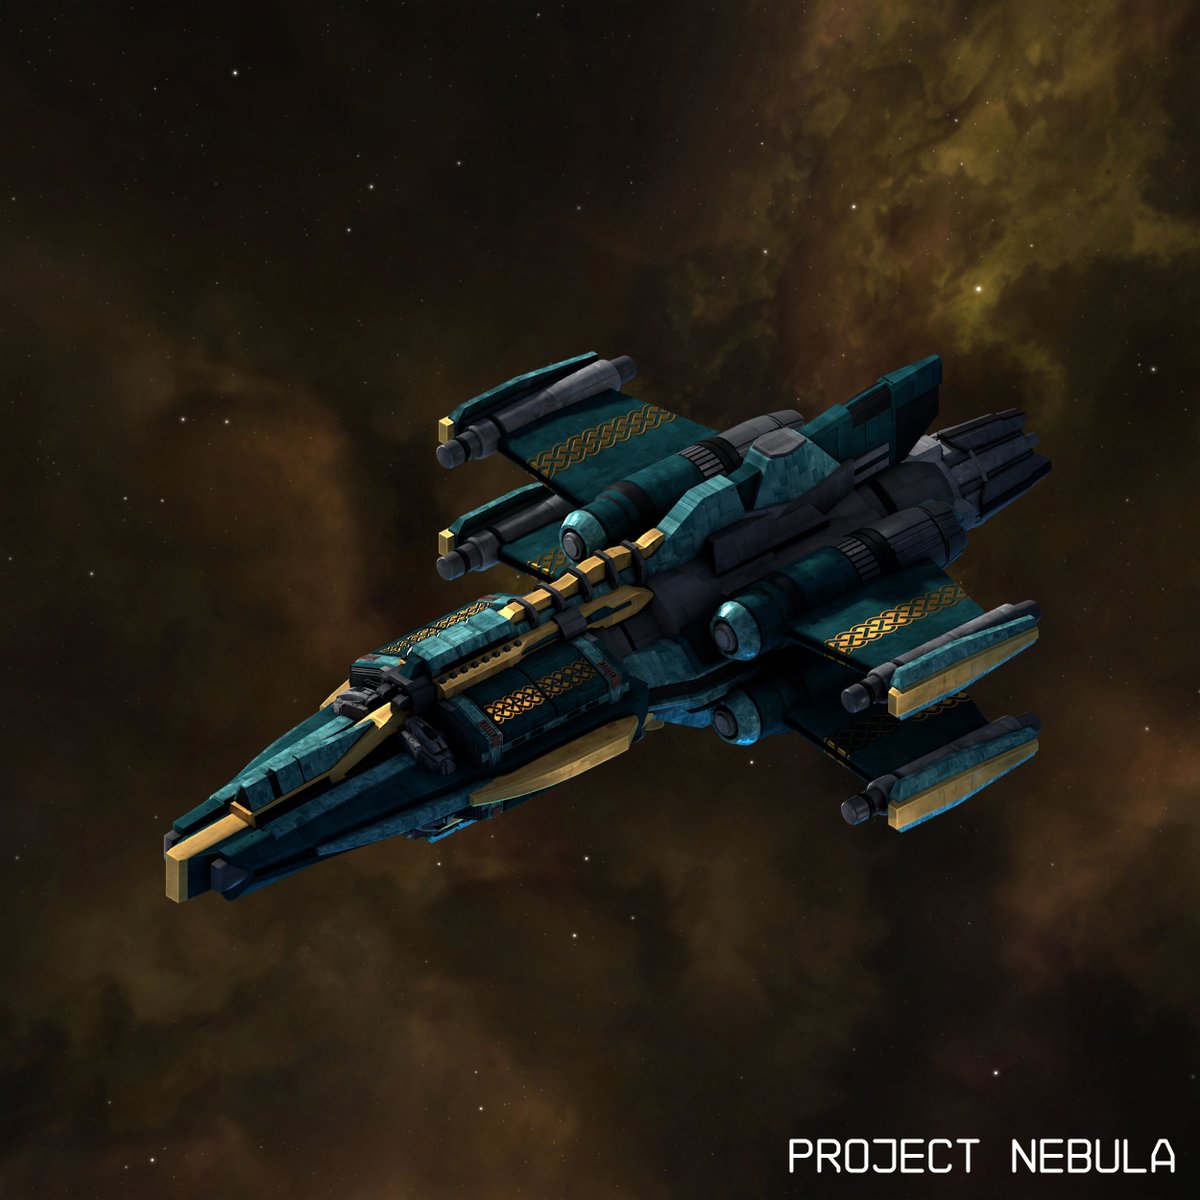 First draft of the @SmythsNFT themed Herald spaceship. Teal-gold look with Viking patterns. Anything you'd change?